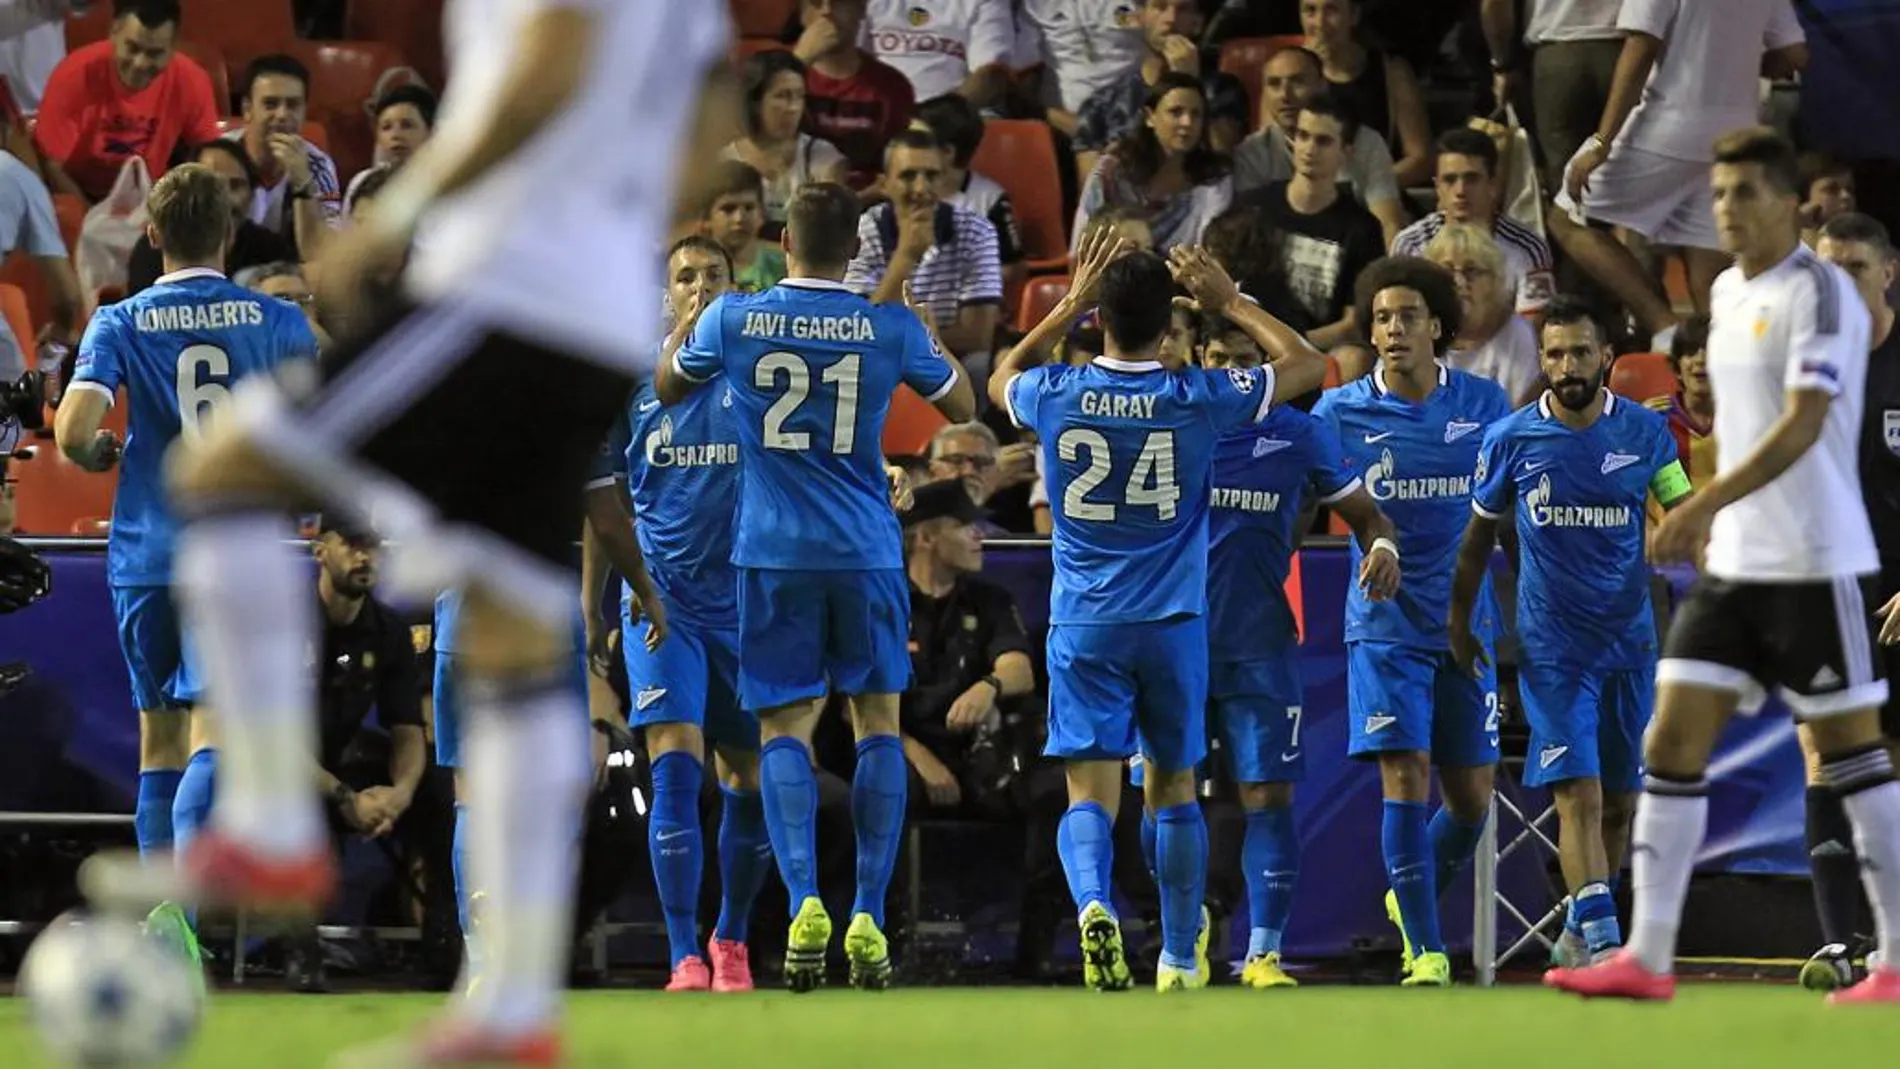 Zenit's Hulk, background third right, celebrates after scoring against Valencia during a Group H Champions League soccer match between Valencia and Zenit Saint Petersburg, at the Mestalla stadium in Valencia, Spain, Wednesday, Sept. 16, 2015. (AP Photo/Alberto Saiz)